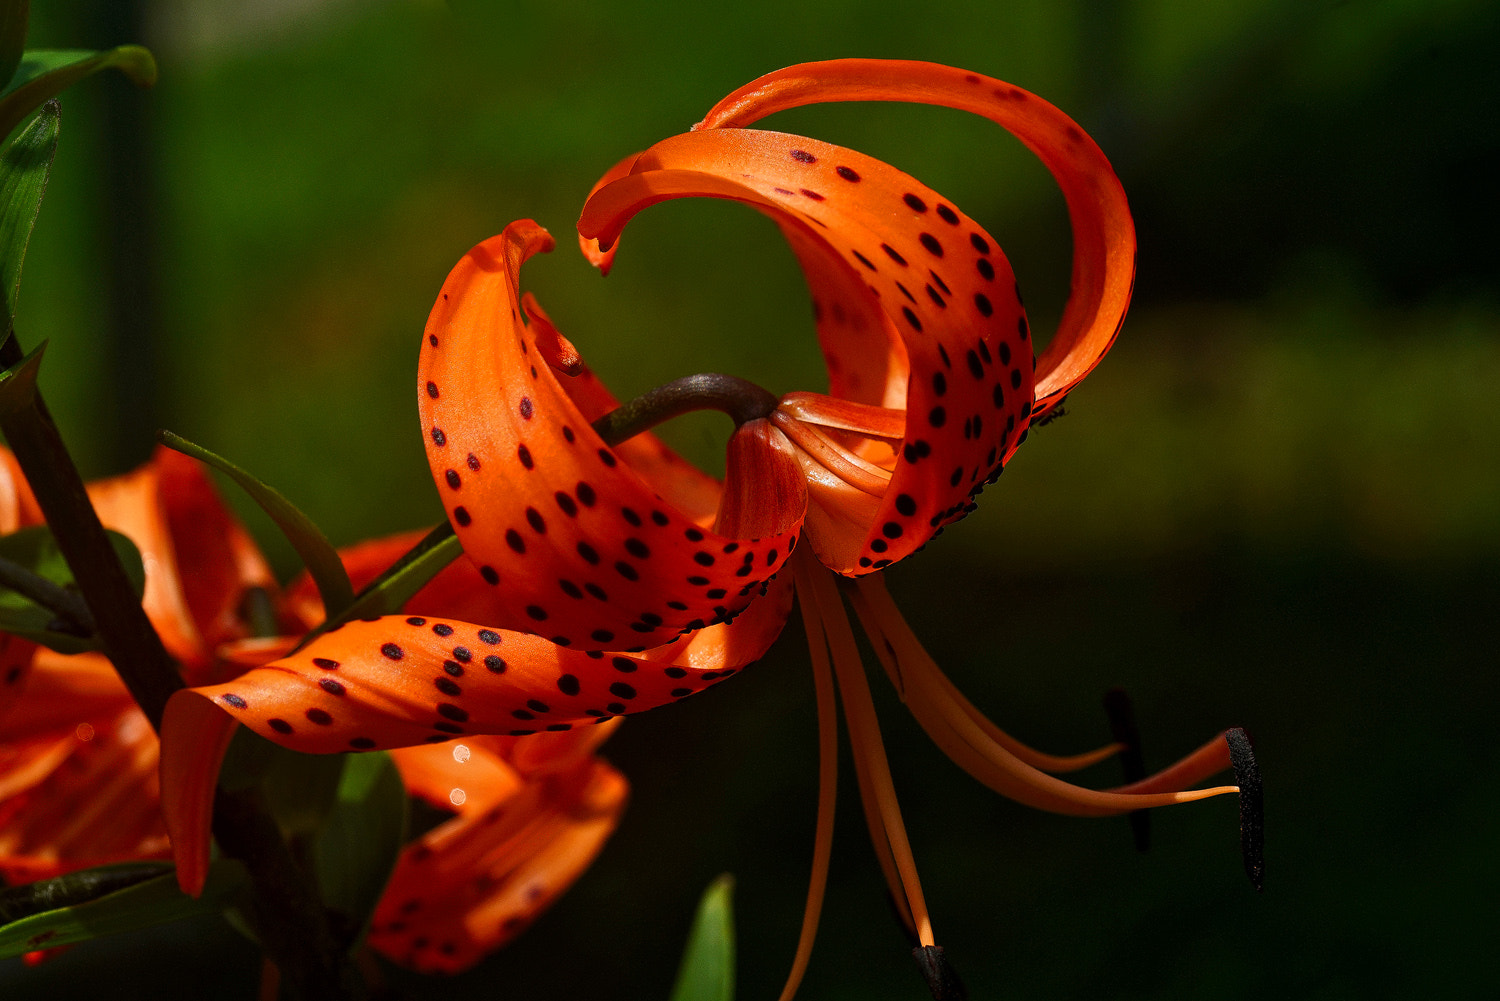 100mm F2.8 SSM sample photo. Tiger lily photography